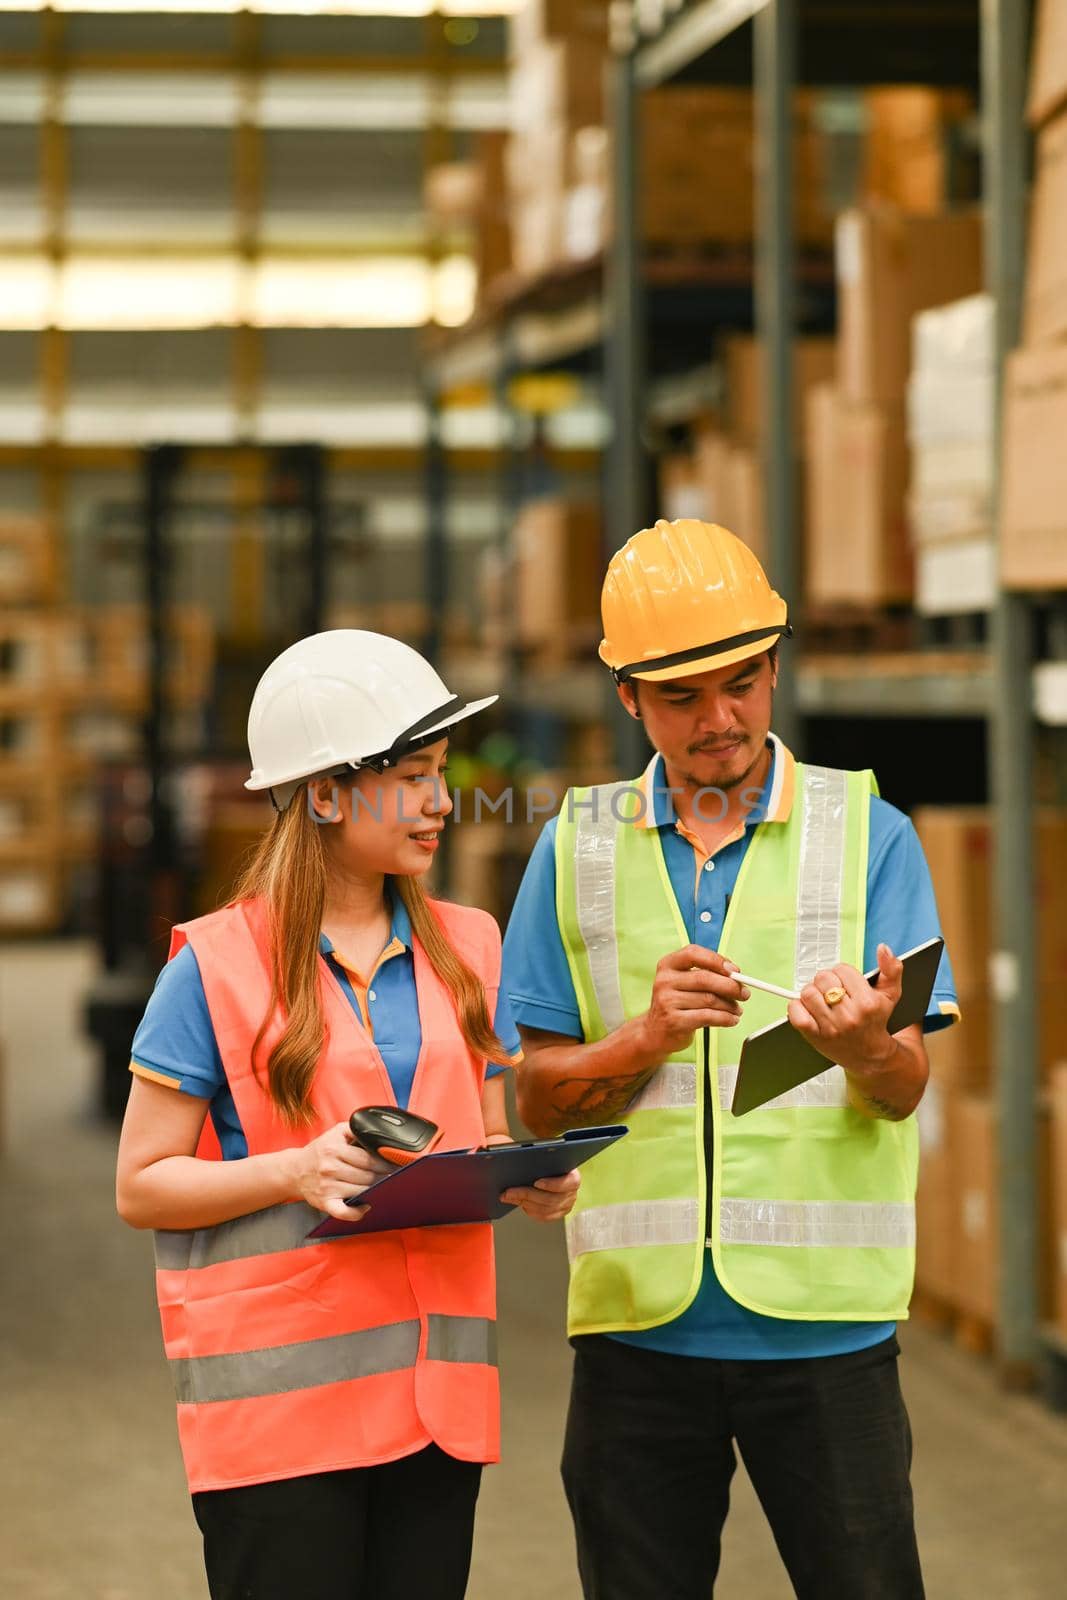 Warehouse workers in hardhats and and vests looking up order details on a tablet while standing between retail warehouse full of shelves.